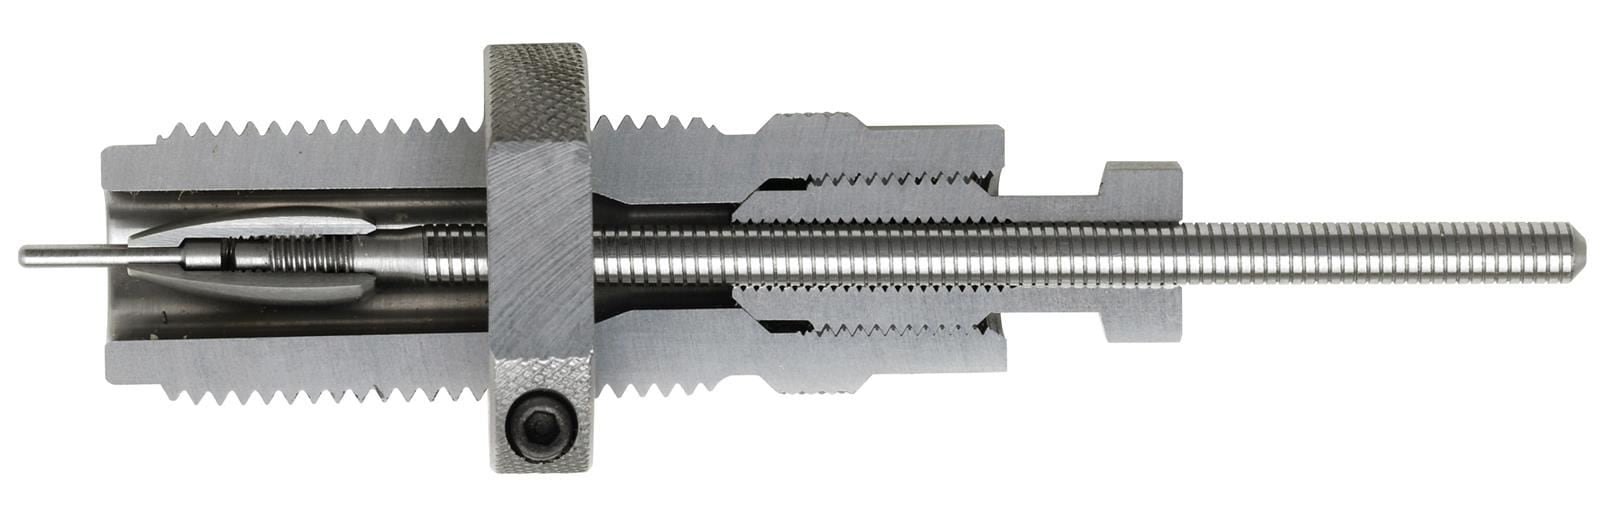 Hornady Neck Size Die 22 Cal